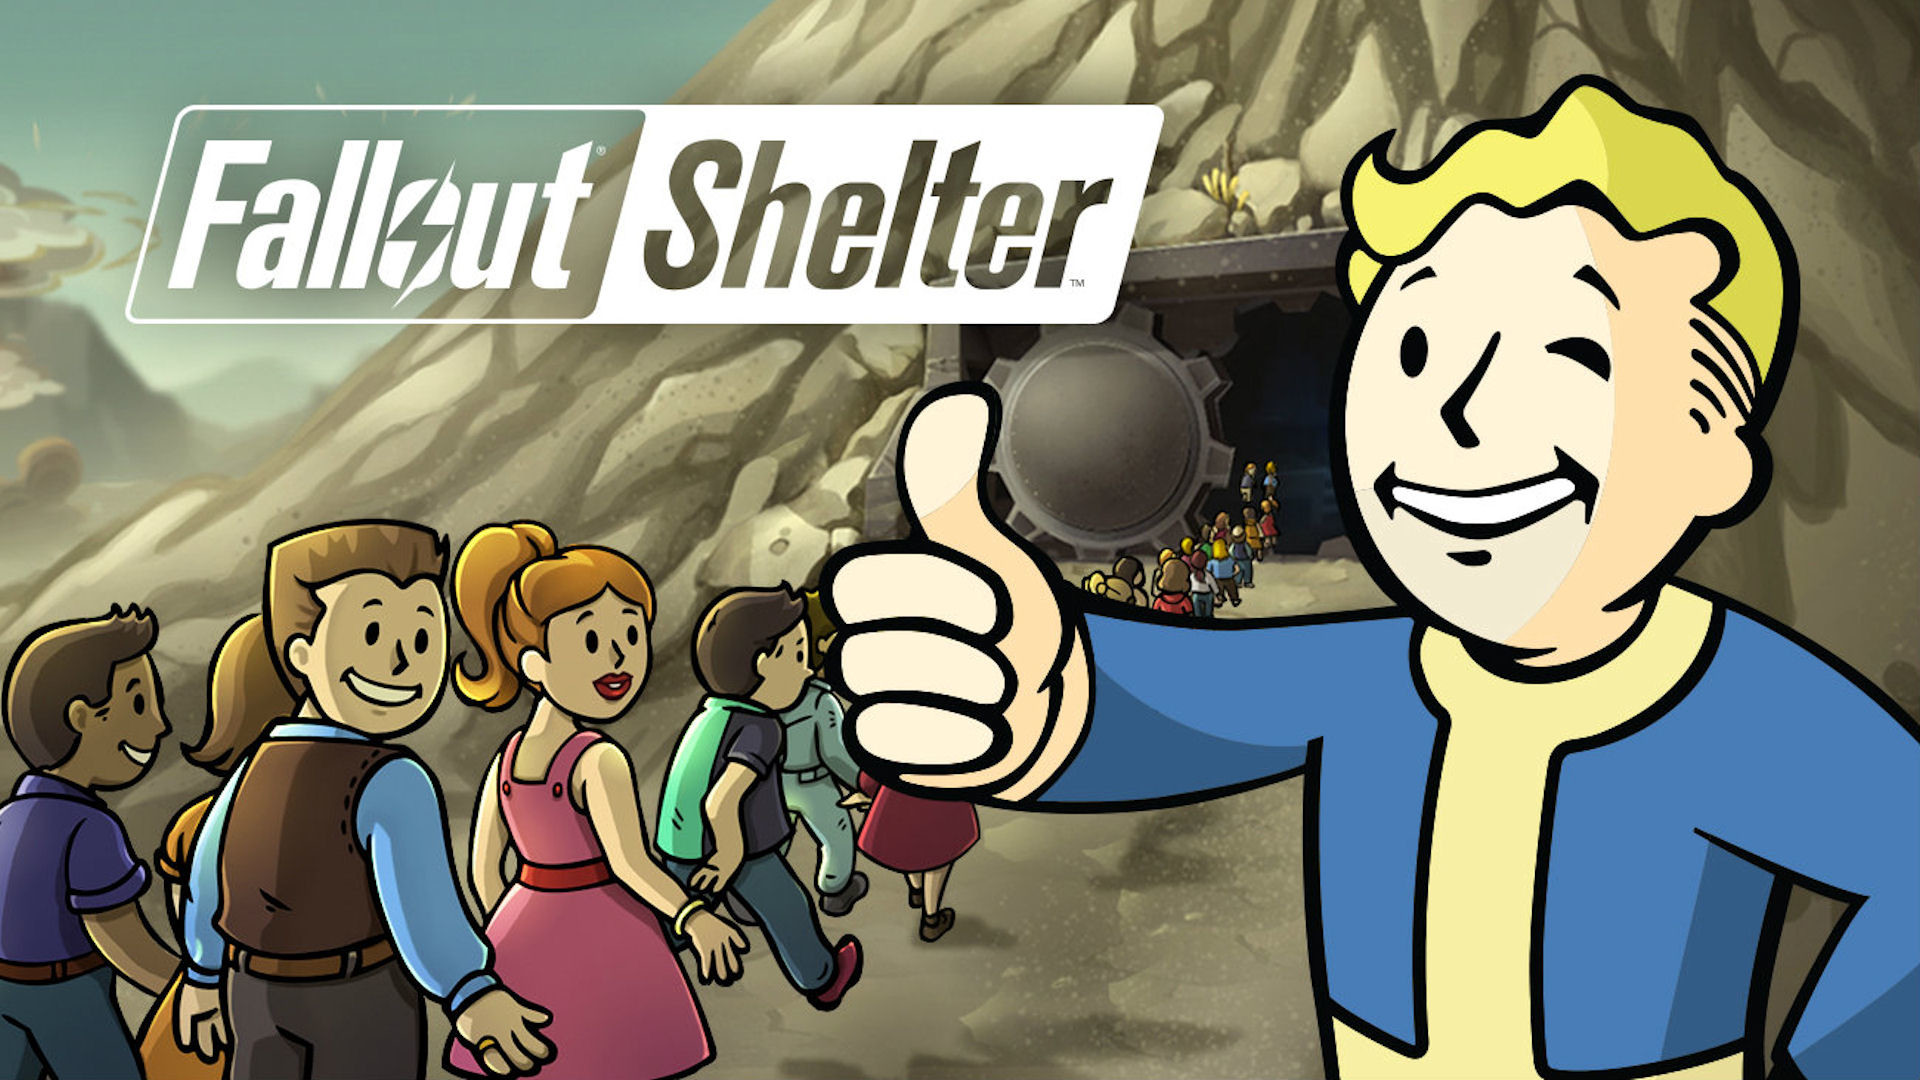 1920x1080 Fallout Shelter Update Adds Survival Mode and More!